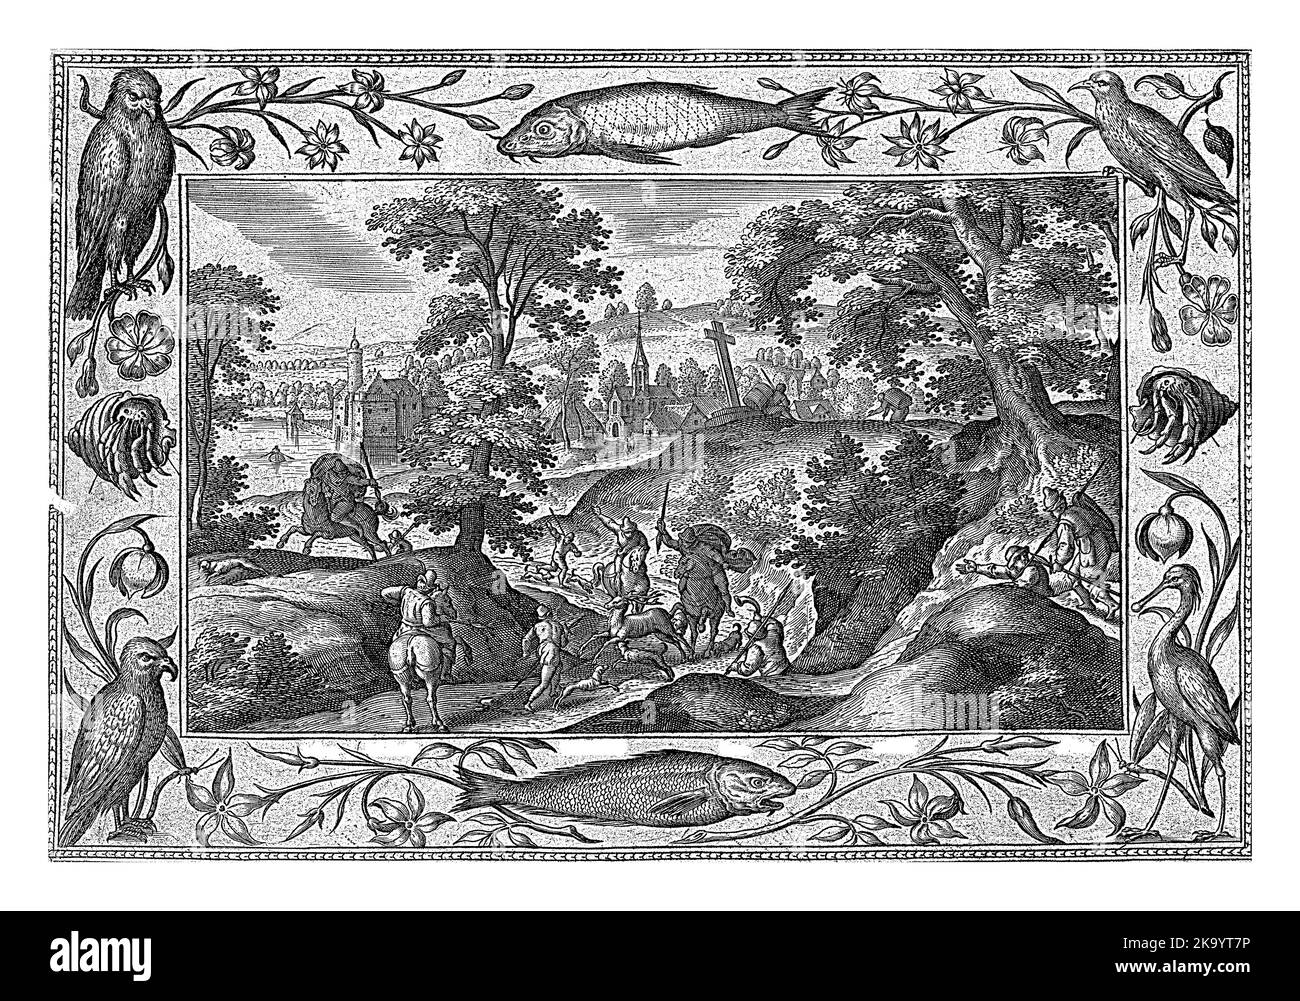 Forest landscape with deer hunting. In the foreground, a deer is being hunted by hunters. The print has an ornamental frame with flowers, fish and ani Stock Photo